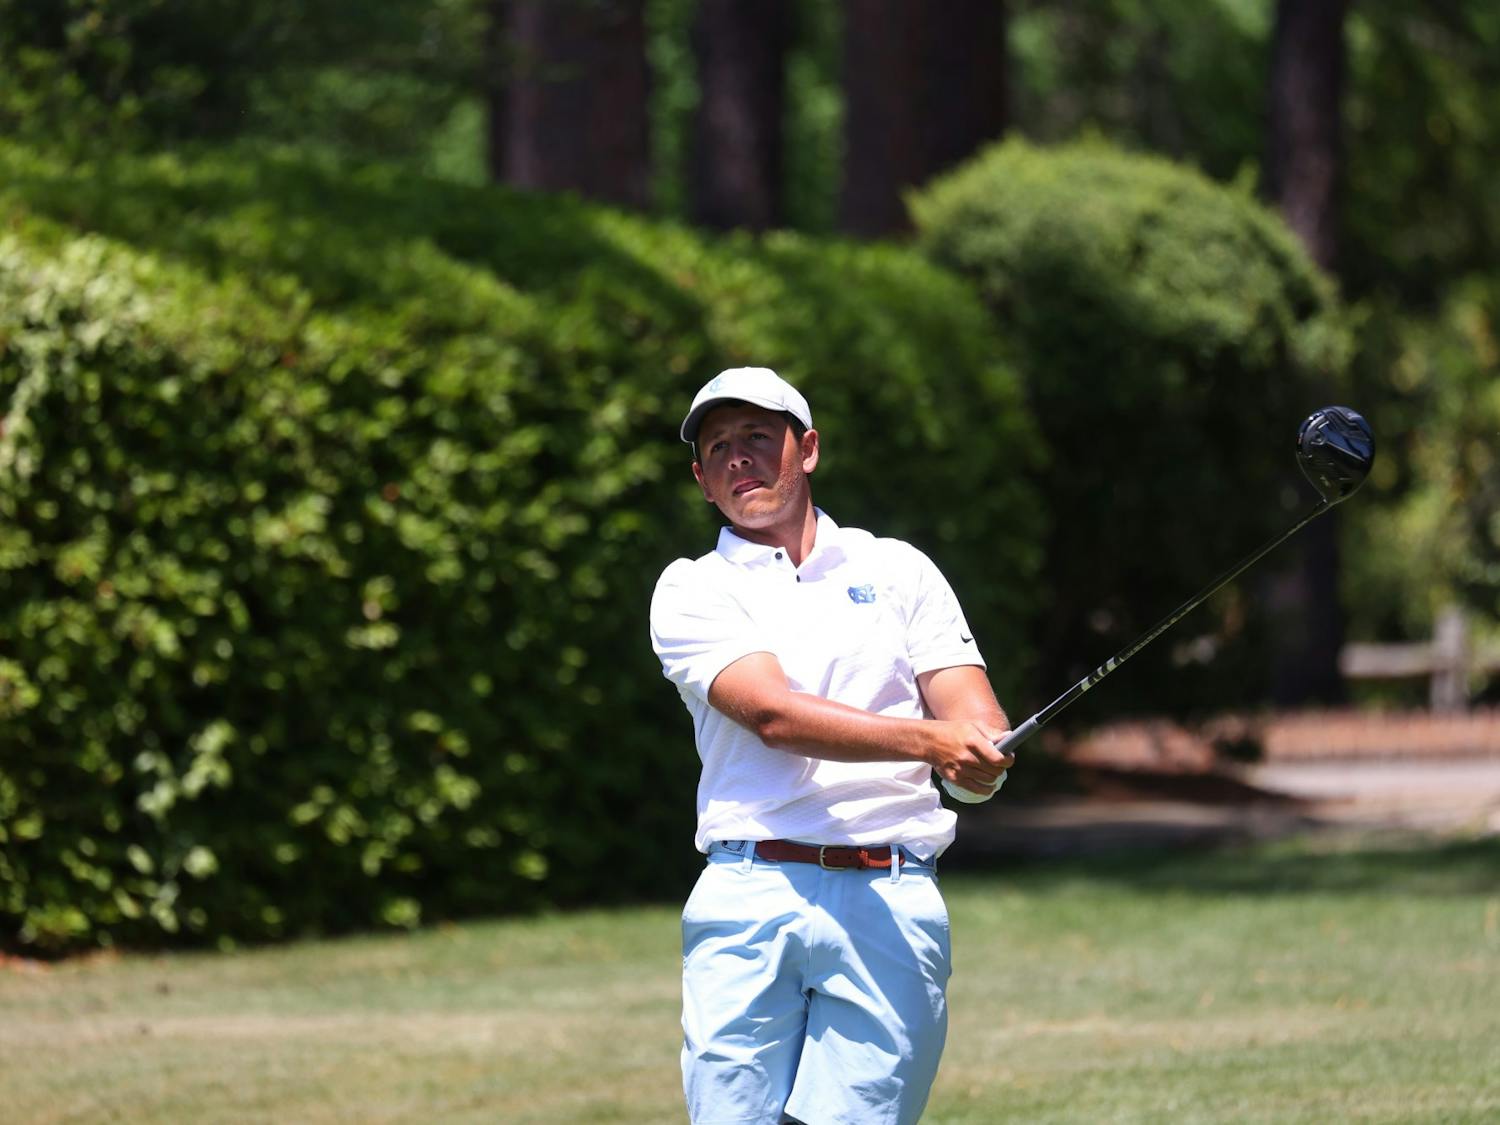 UNC senior Dylan Menante swings his golf club during the 2023 ACC Men’s Golf Championship at the Dogwood Course in Pinehurst, N.C. on April 21, 2023.
Photo Courtesy of Andy Mead/YCJ.